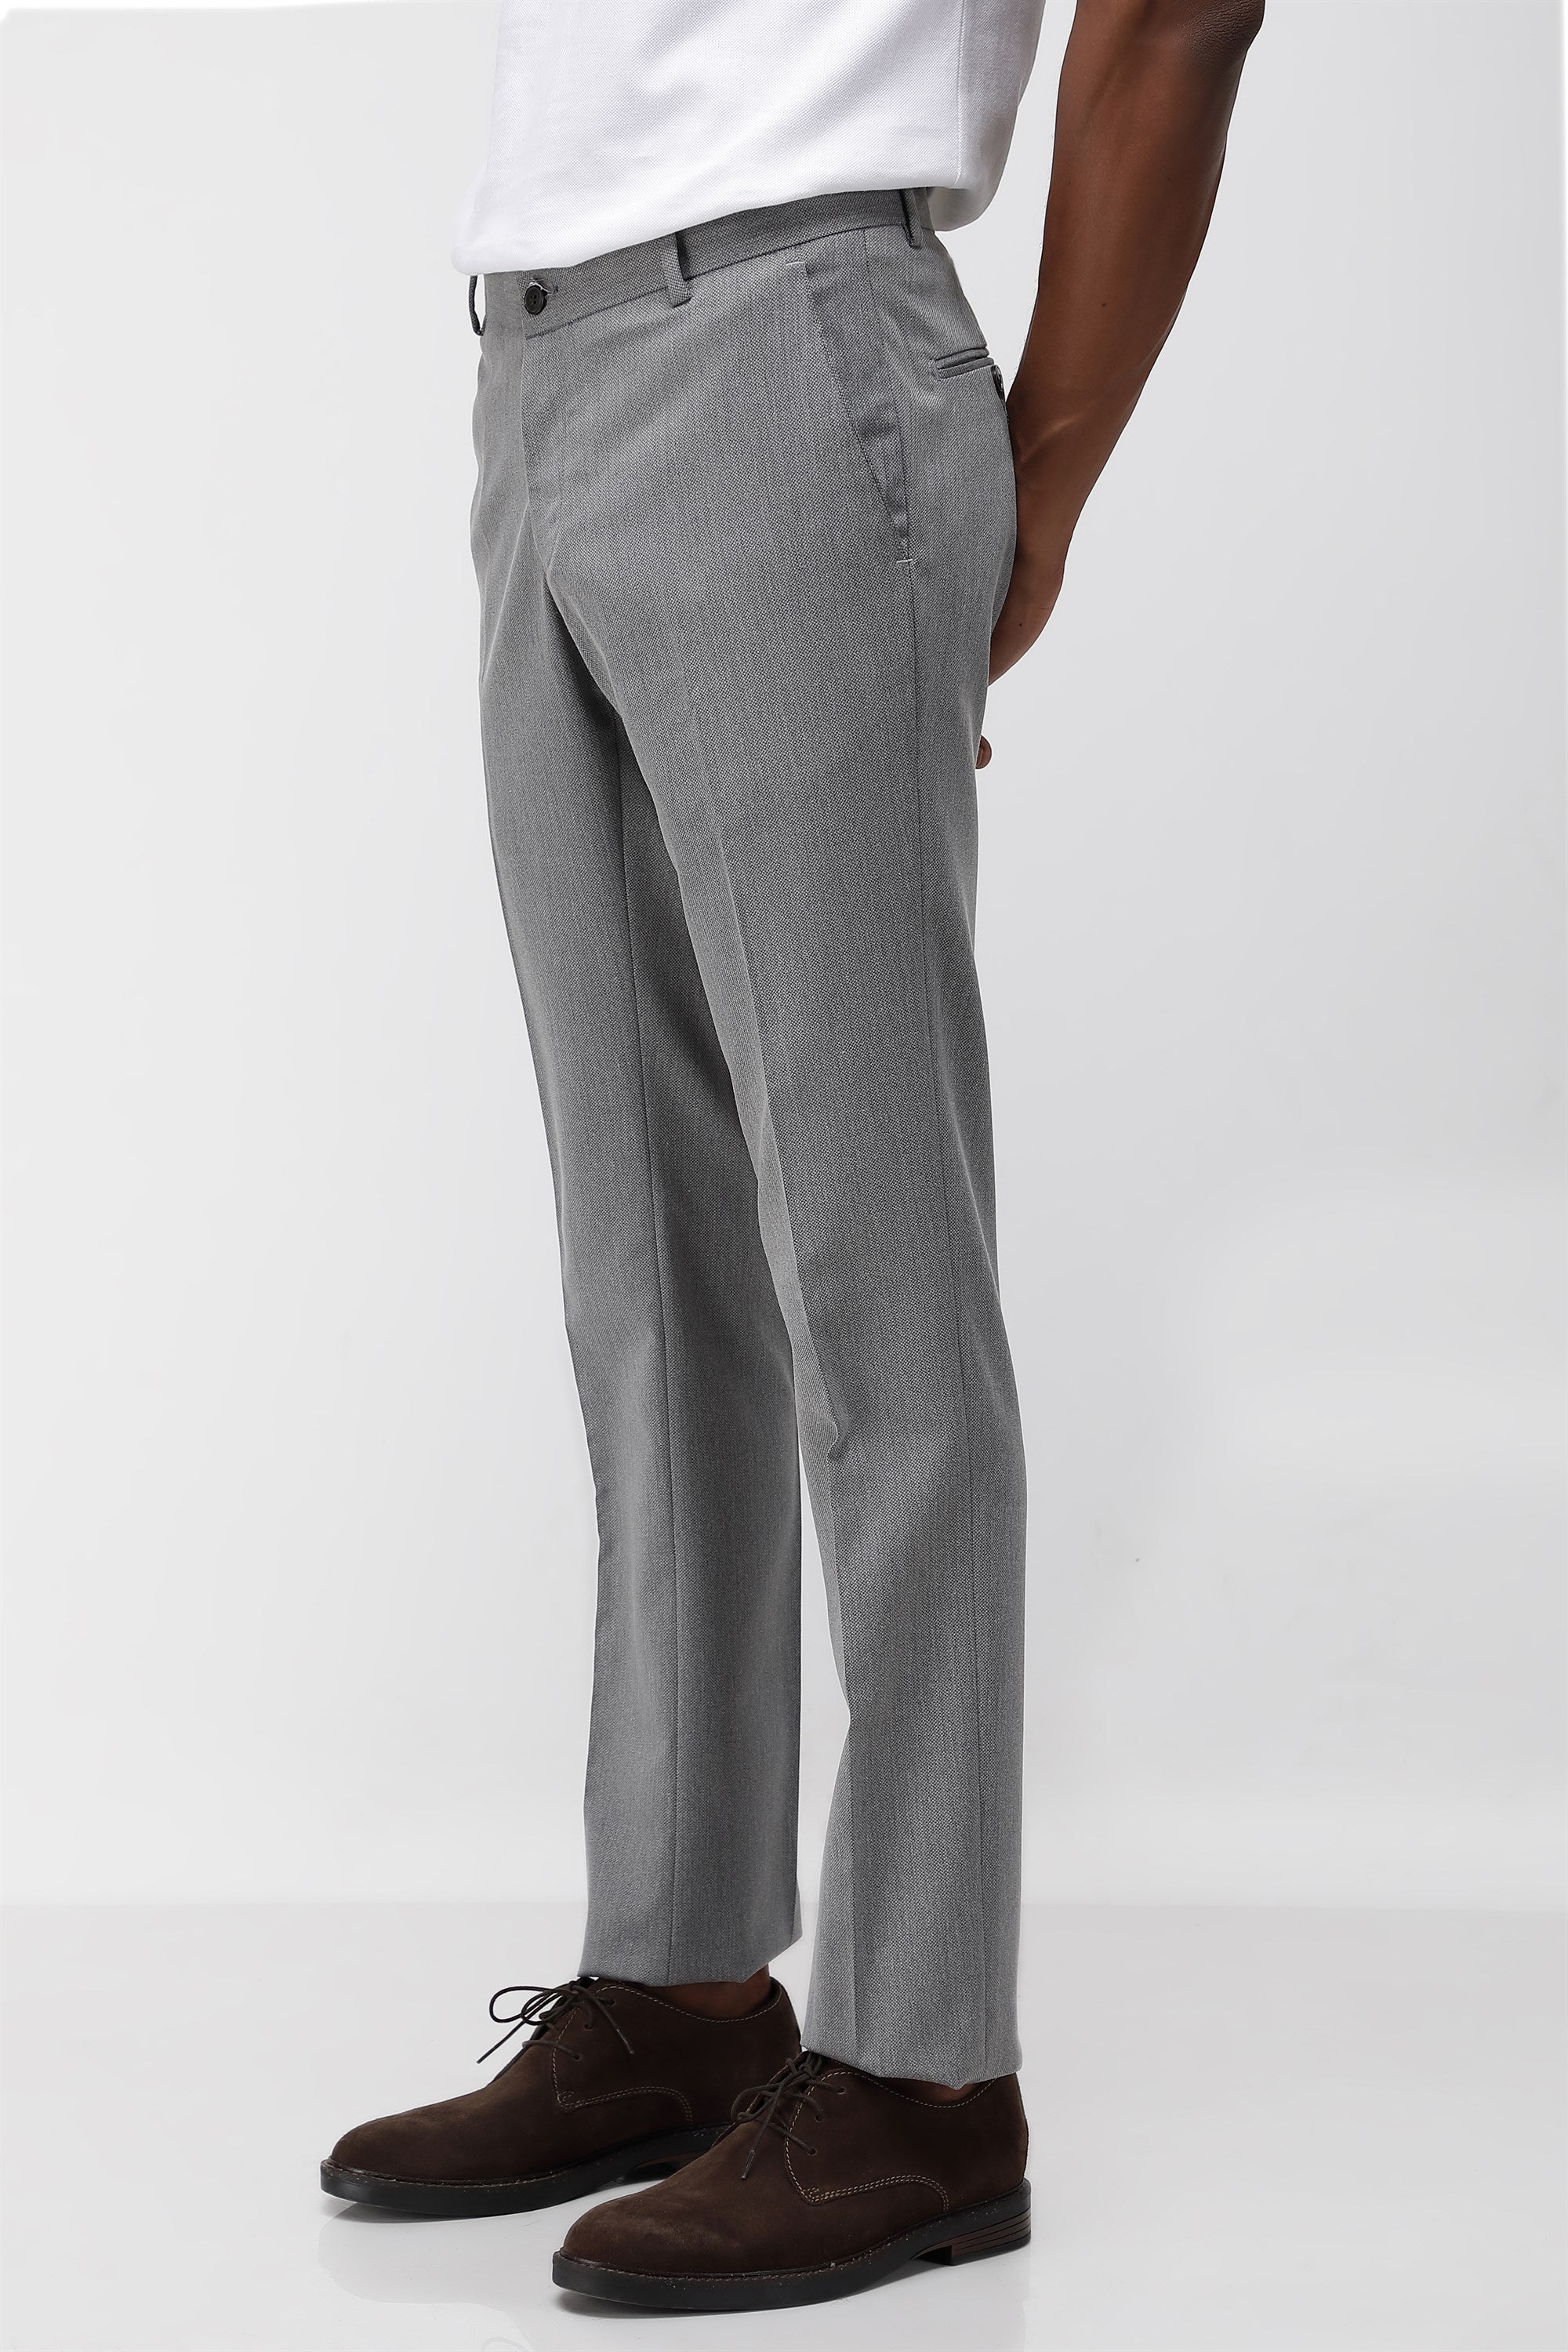 Chinos Casual Branded Trousers at Rs 850/piece in New Delhi | ID:  22622117848